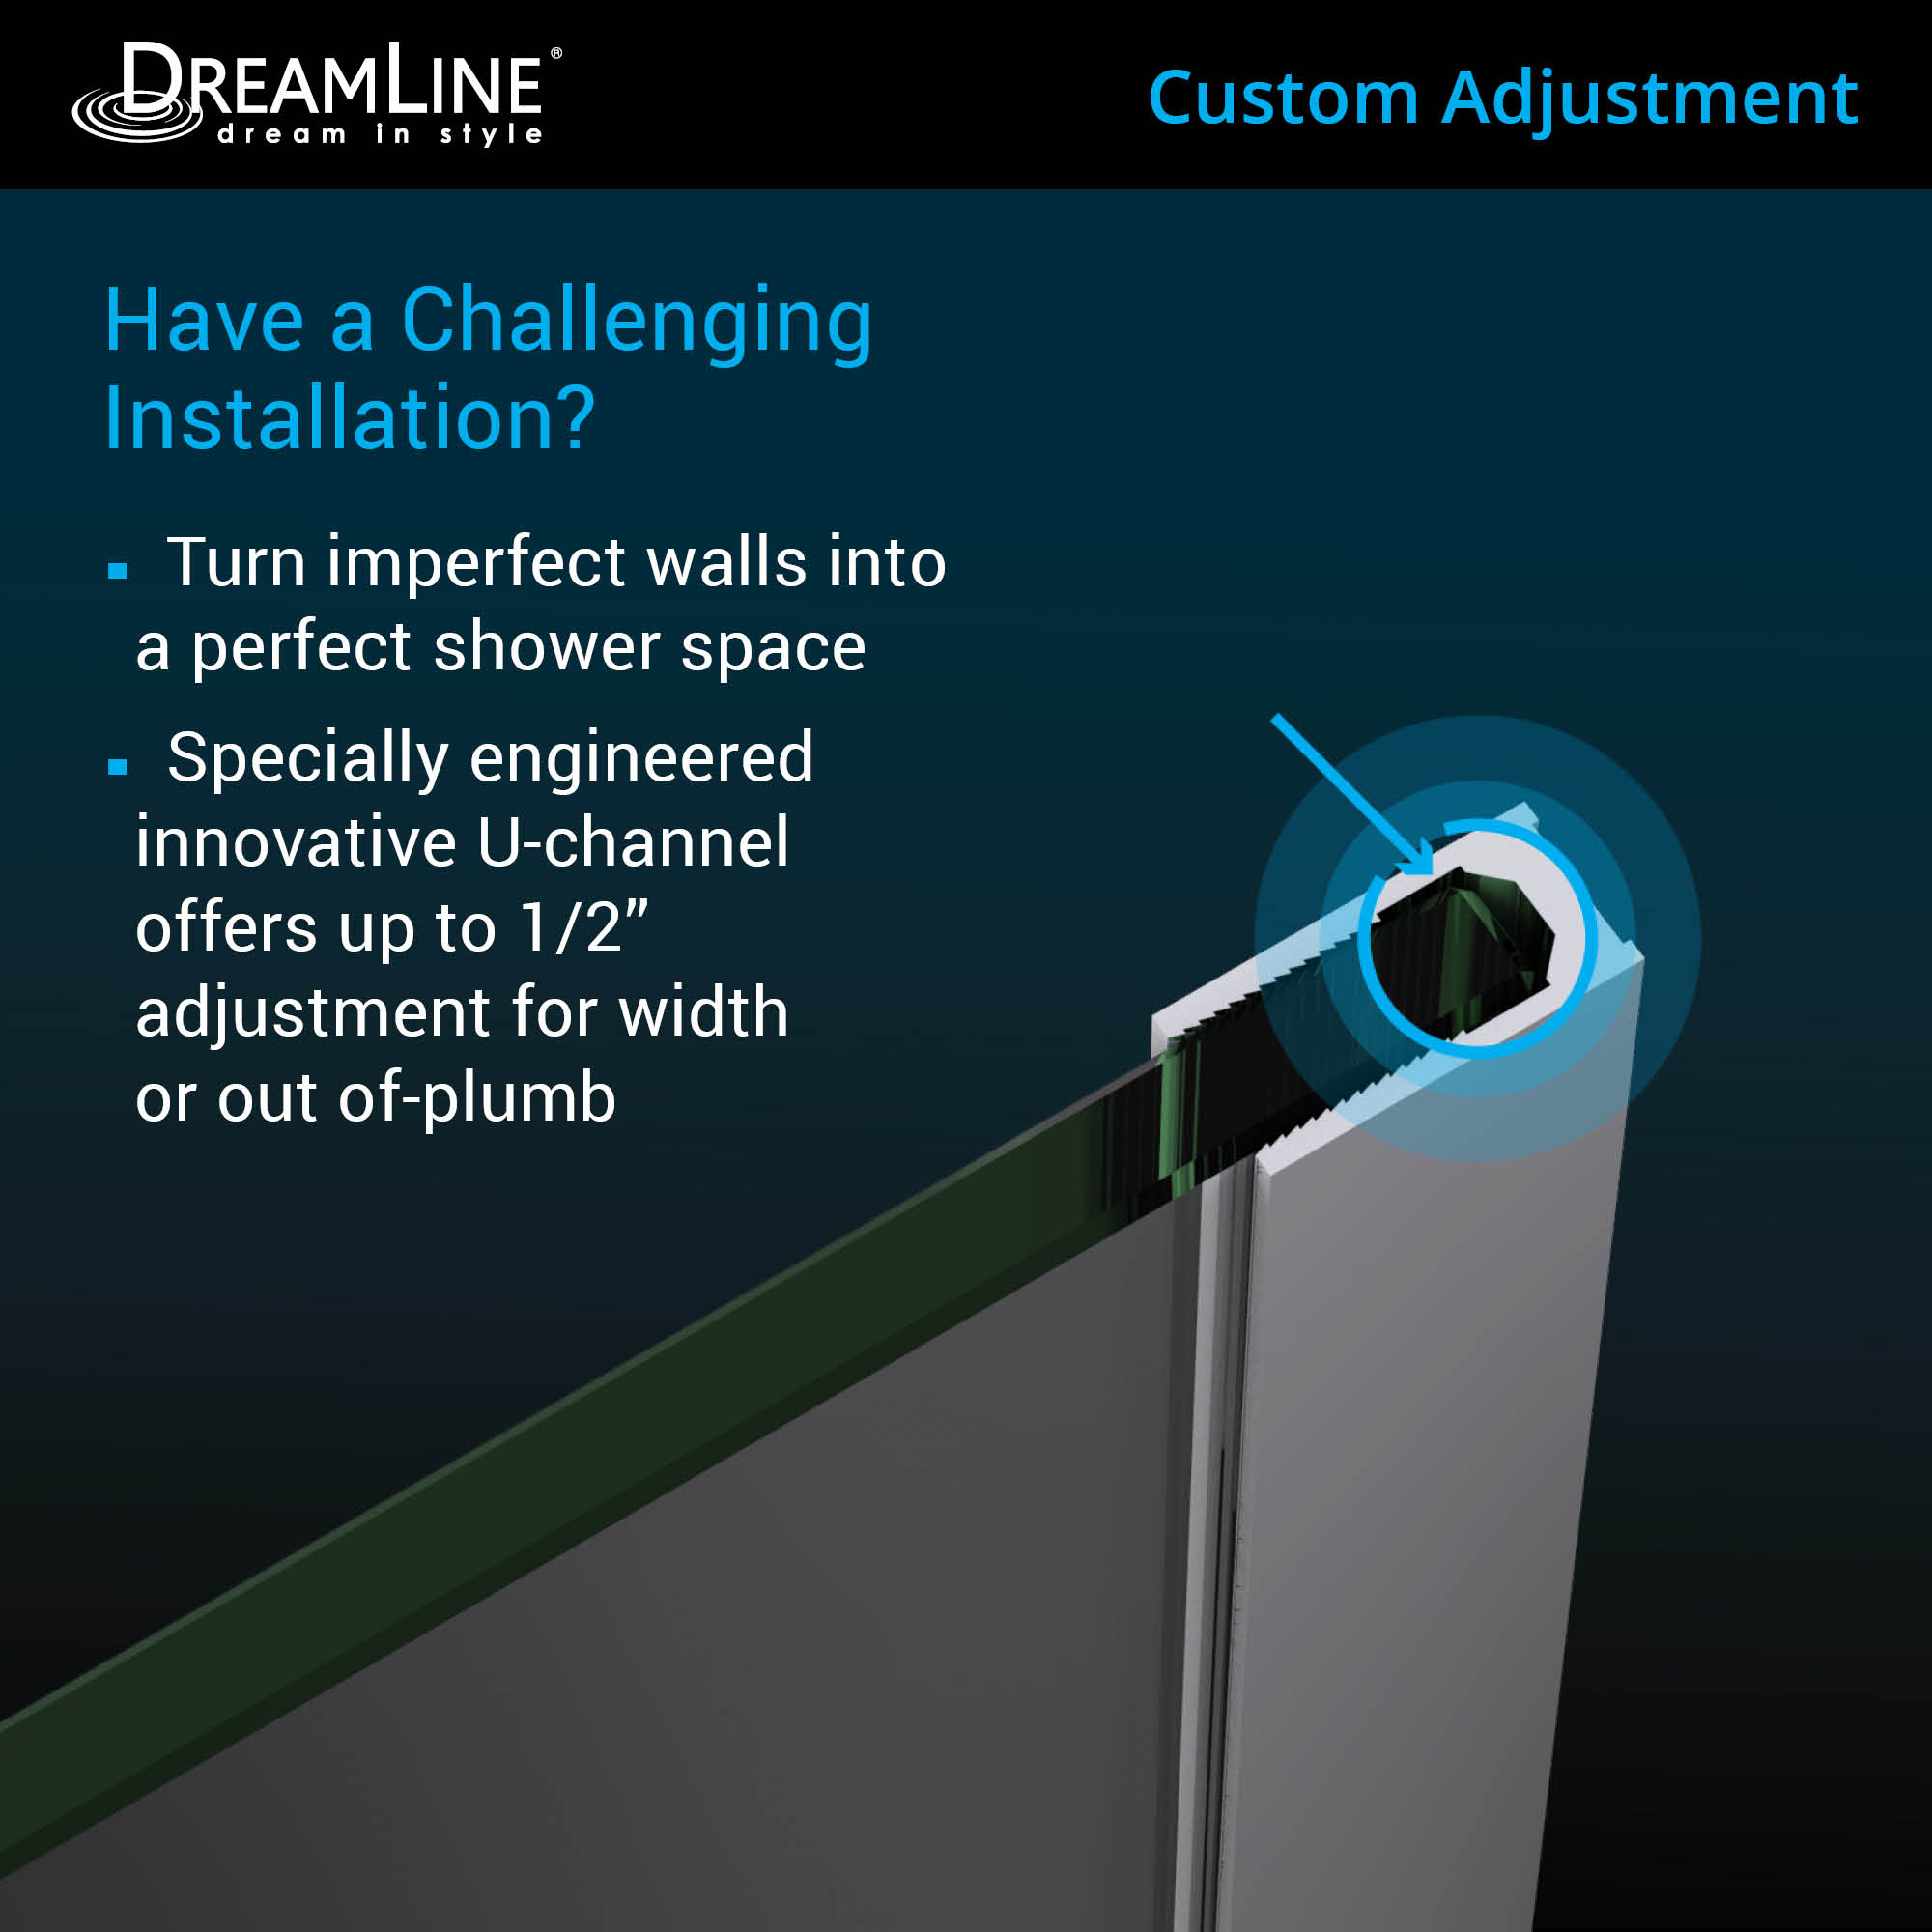 DreamLine Unidoor Plus 54 in. W x 36 3/8 in. D x 72 in. H Frameless Hinged Shower Enclosure, Clear Glass, Oil Rubbed Bronze